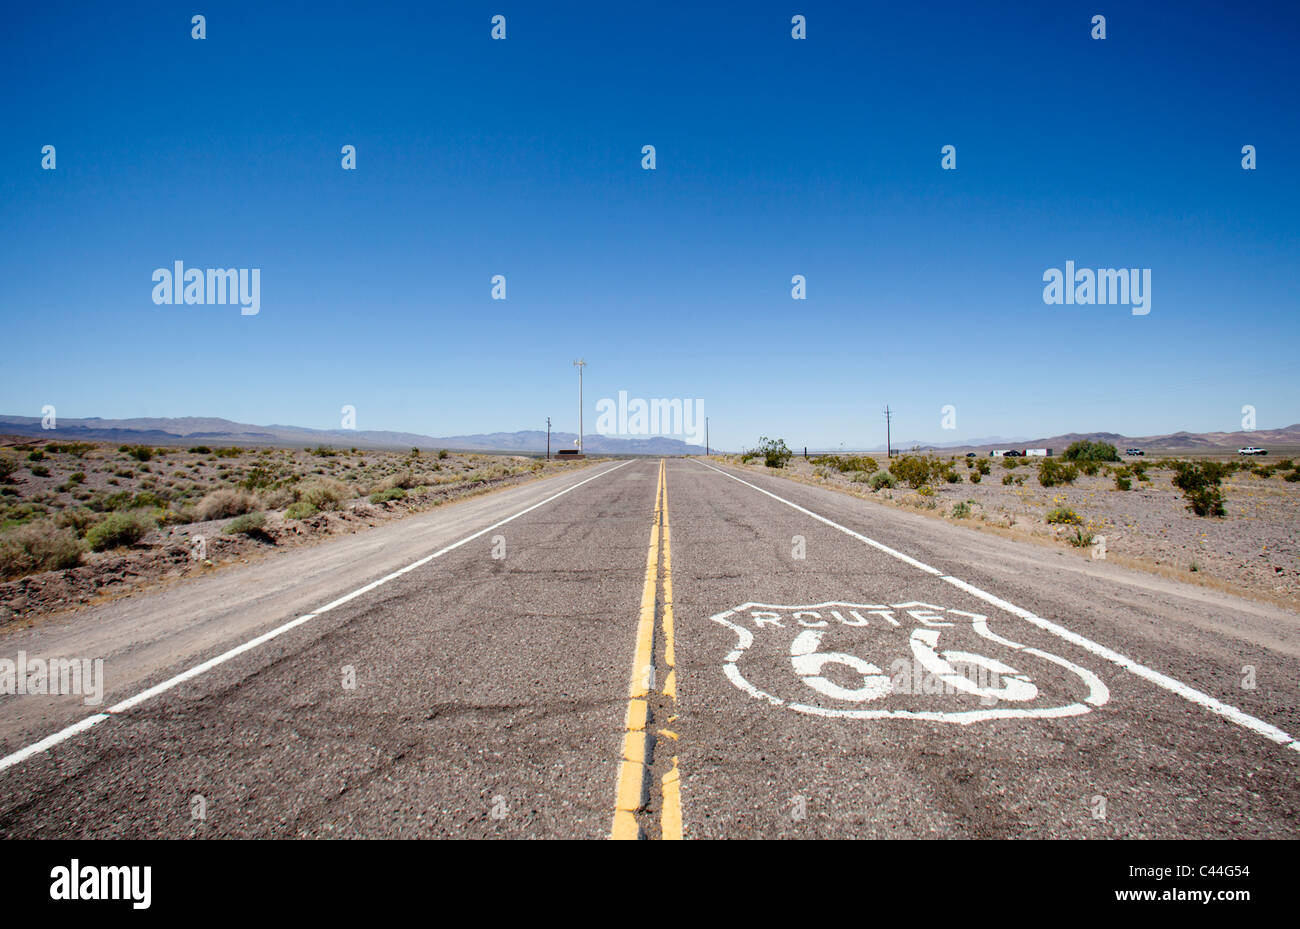 Route 66, historic highway that runs from Chicago, Illinois, covering over 2,400 miles, to Los Angeles, California. Stock Photo